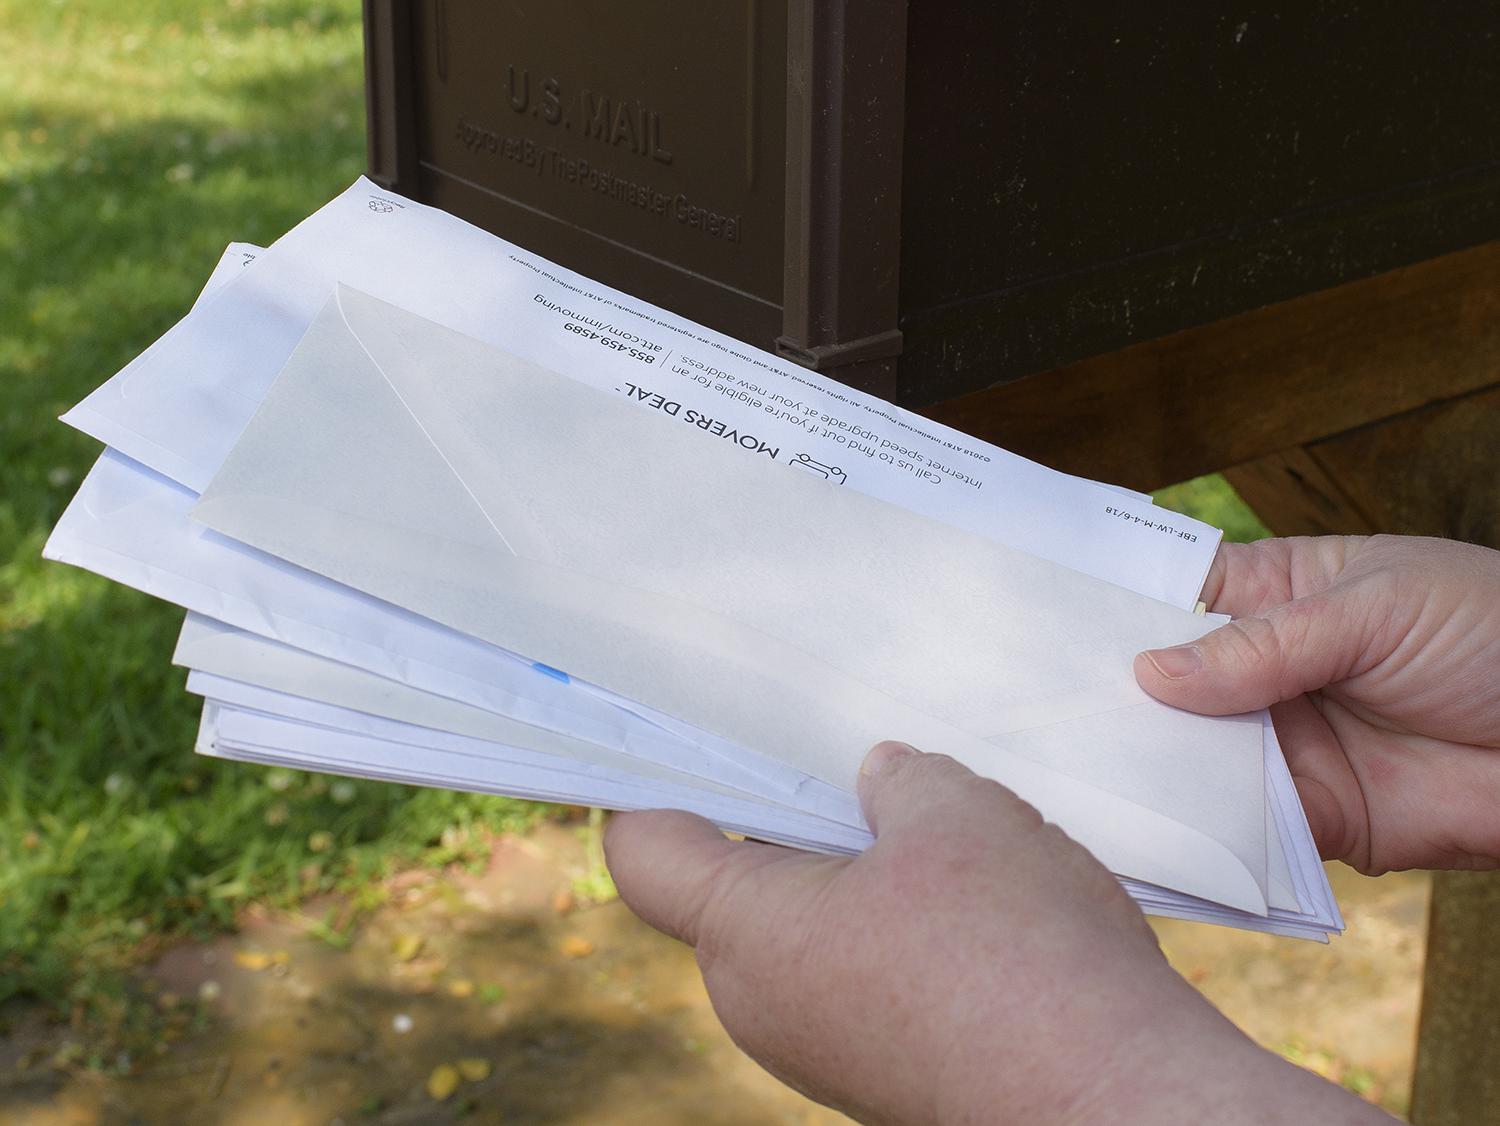 A pair of hands holds a stack of mail taken from a mailbox.